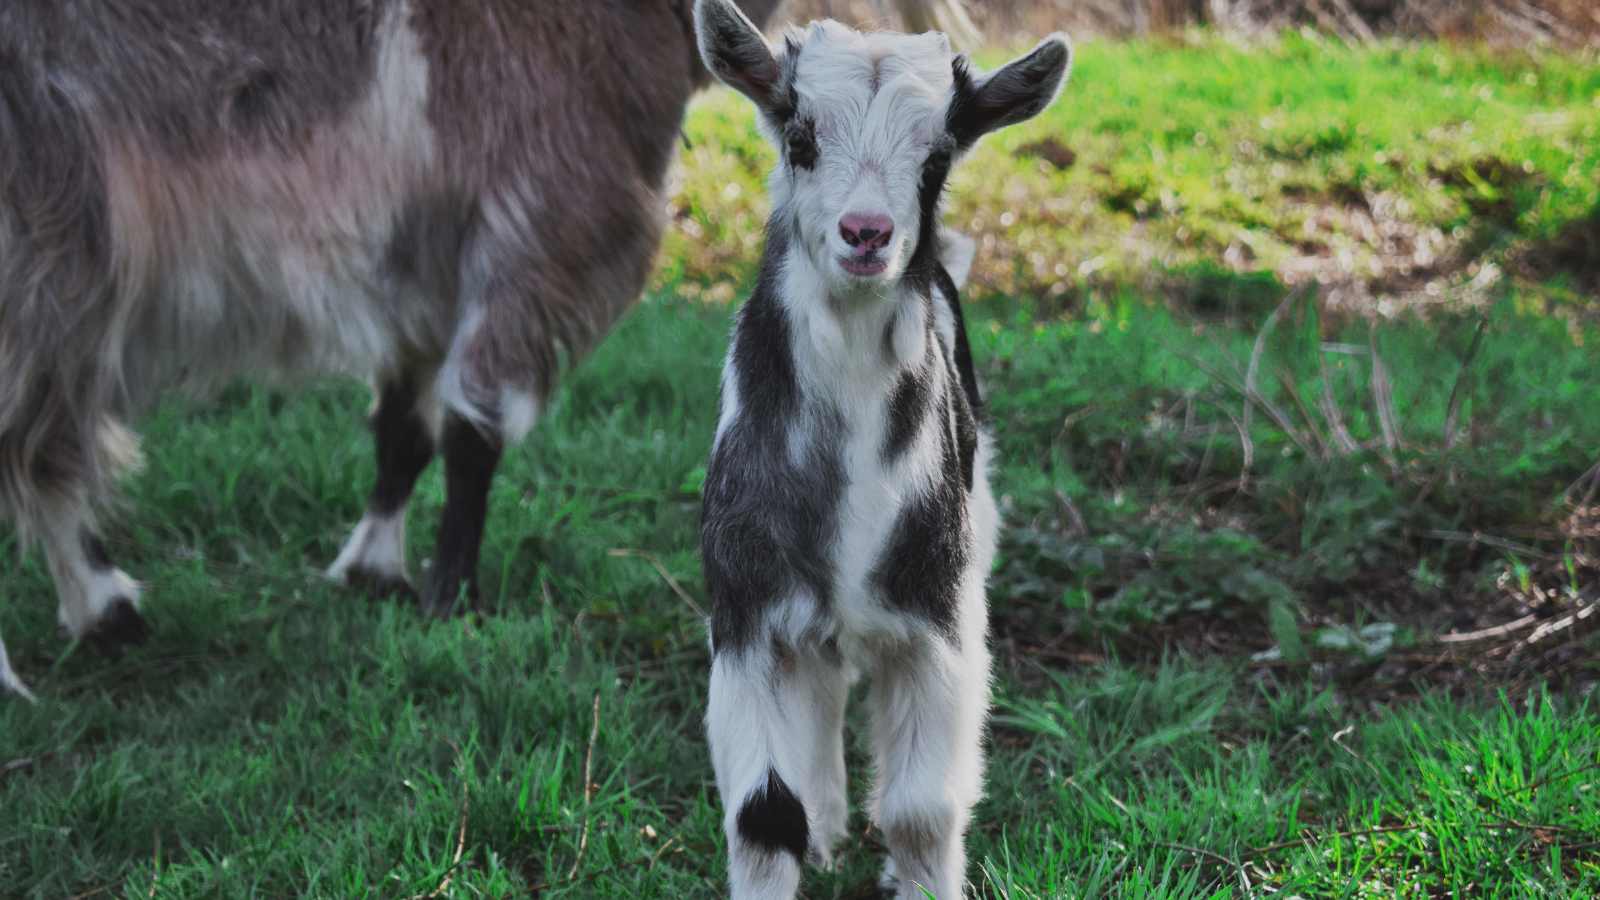 A young brown and white goat baby stares at the camera.